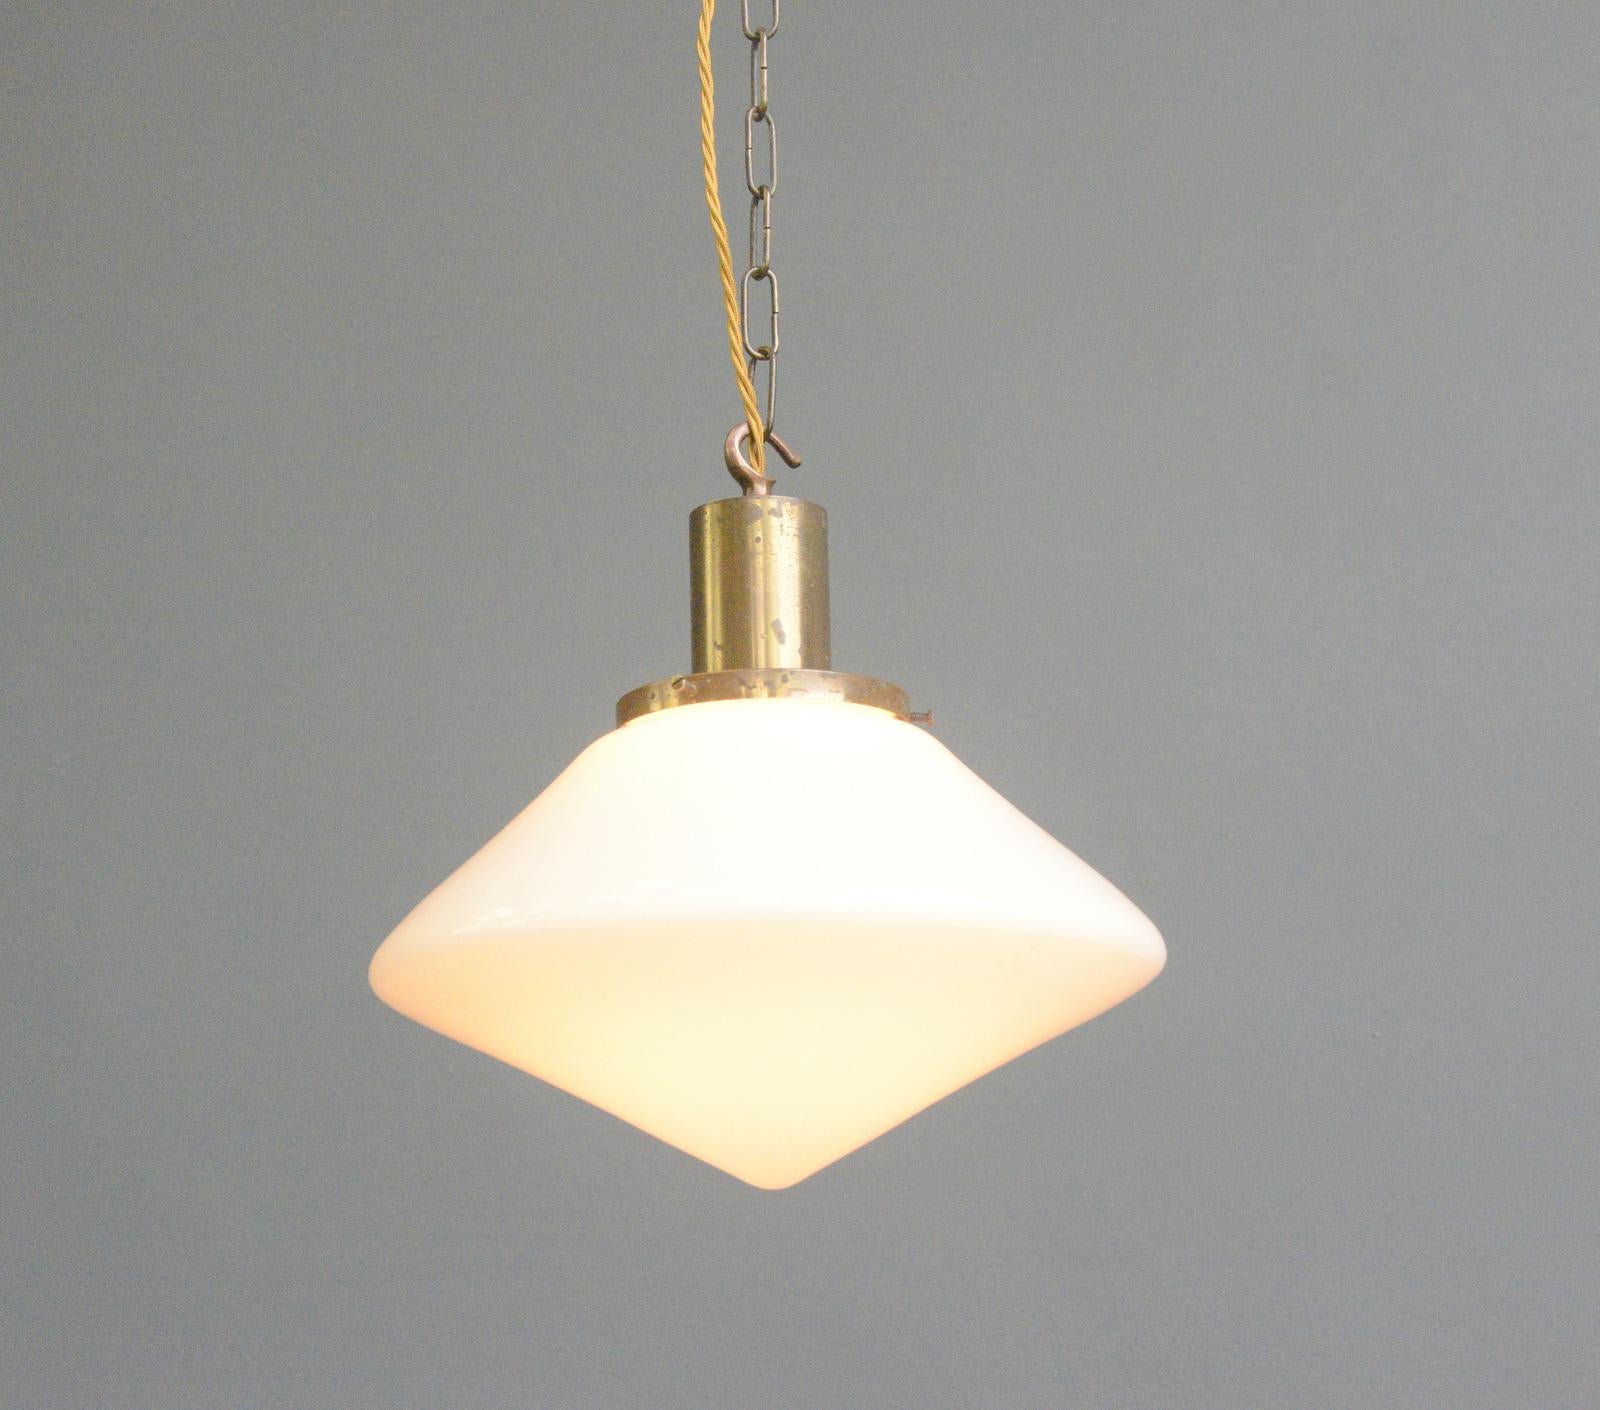 - Pointed opaline glass shade
- Brass gallery
- E27 fitting bulb holder
- German ~ 1930s
- 30cm wide x 35cm tall

Condition report

Fully re wired with modern electrical components, some patina to the brass gallery but no damage to the glass.